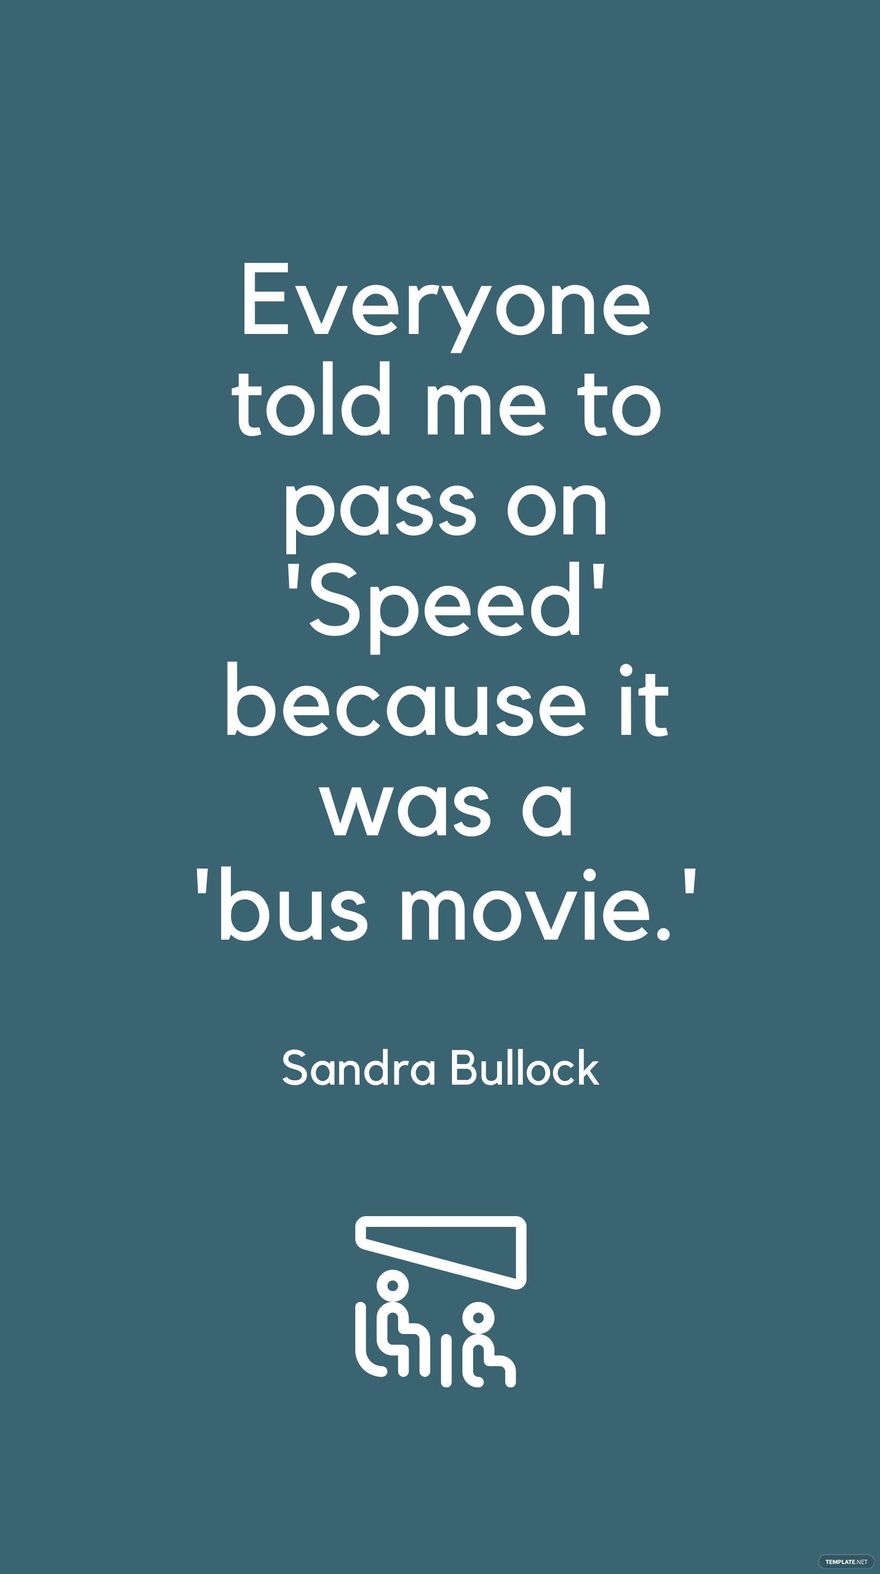 Sandra Bullock - Everyone told me to pass on 'Speed' because it was a 'bus movie.